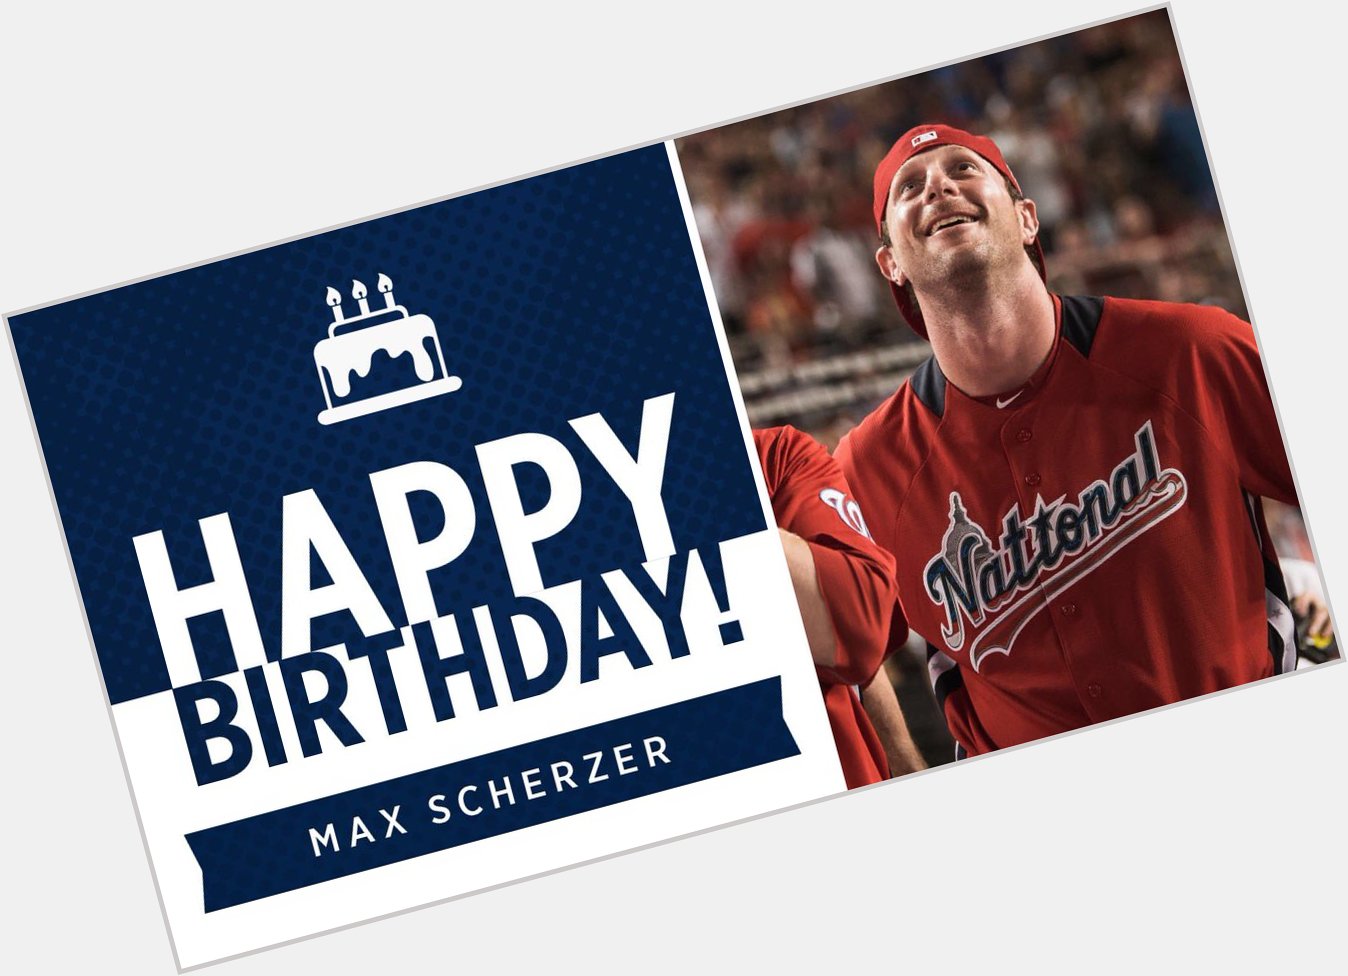 Wishing you and yours a very blessed And a happy birthday to the man himself, Max Scherzer! 